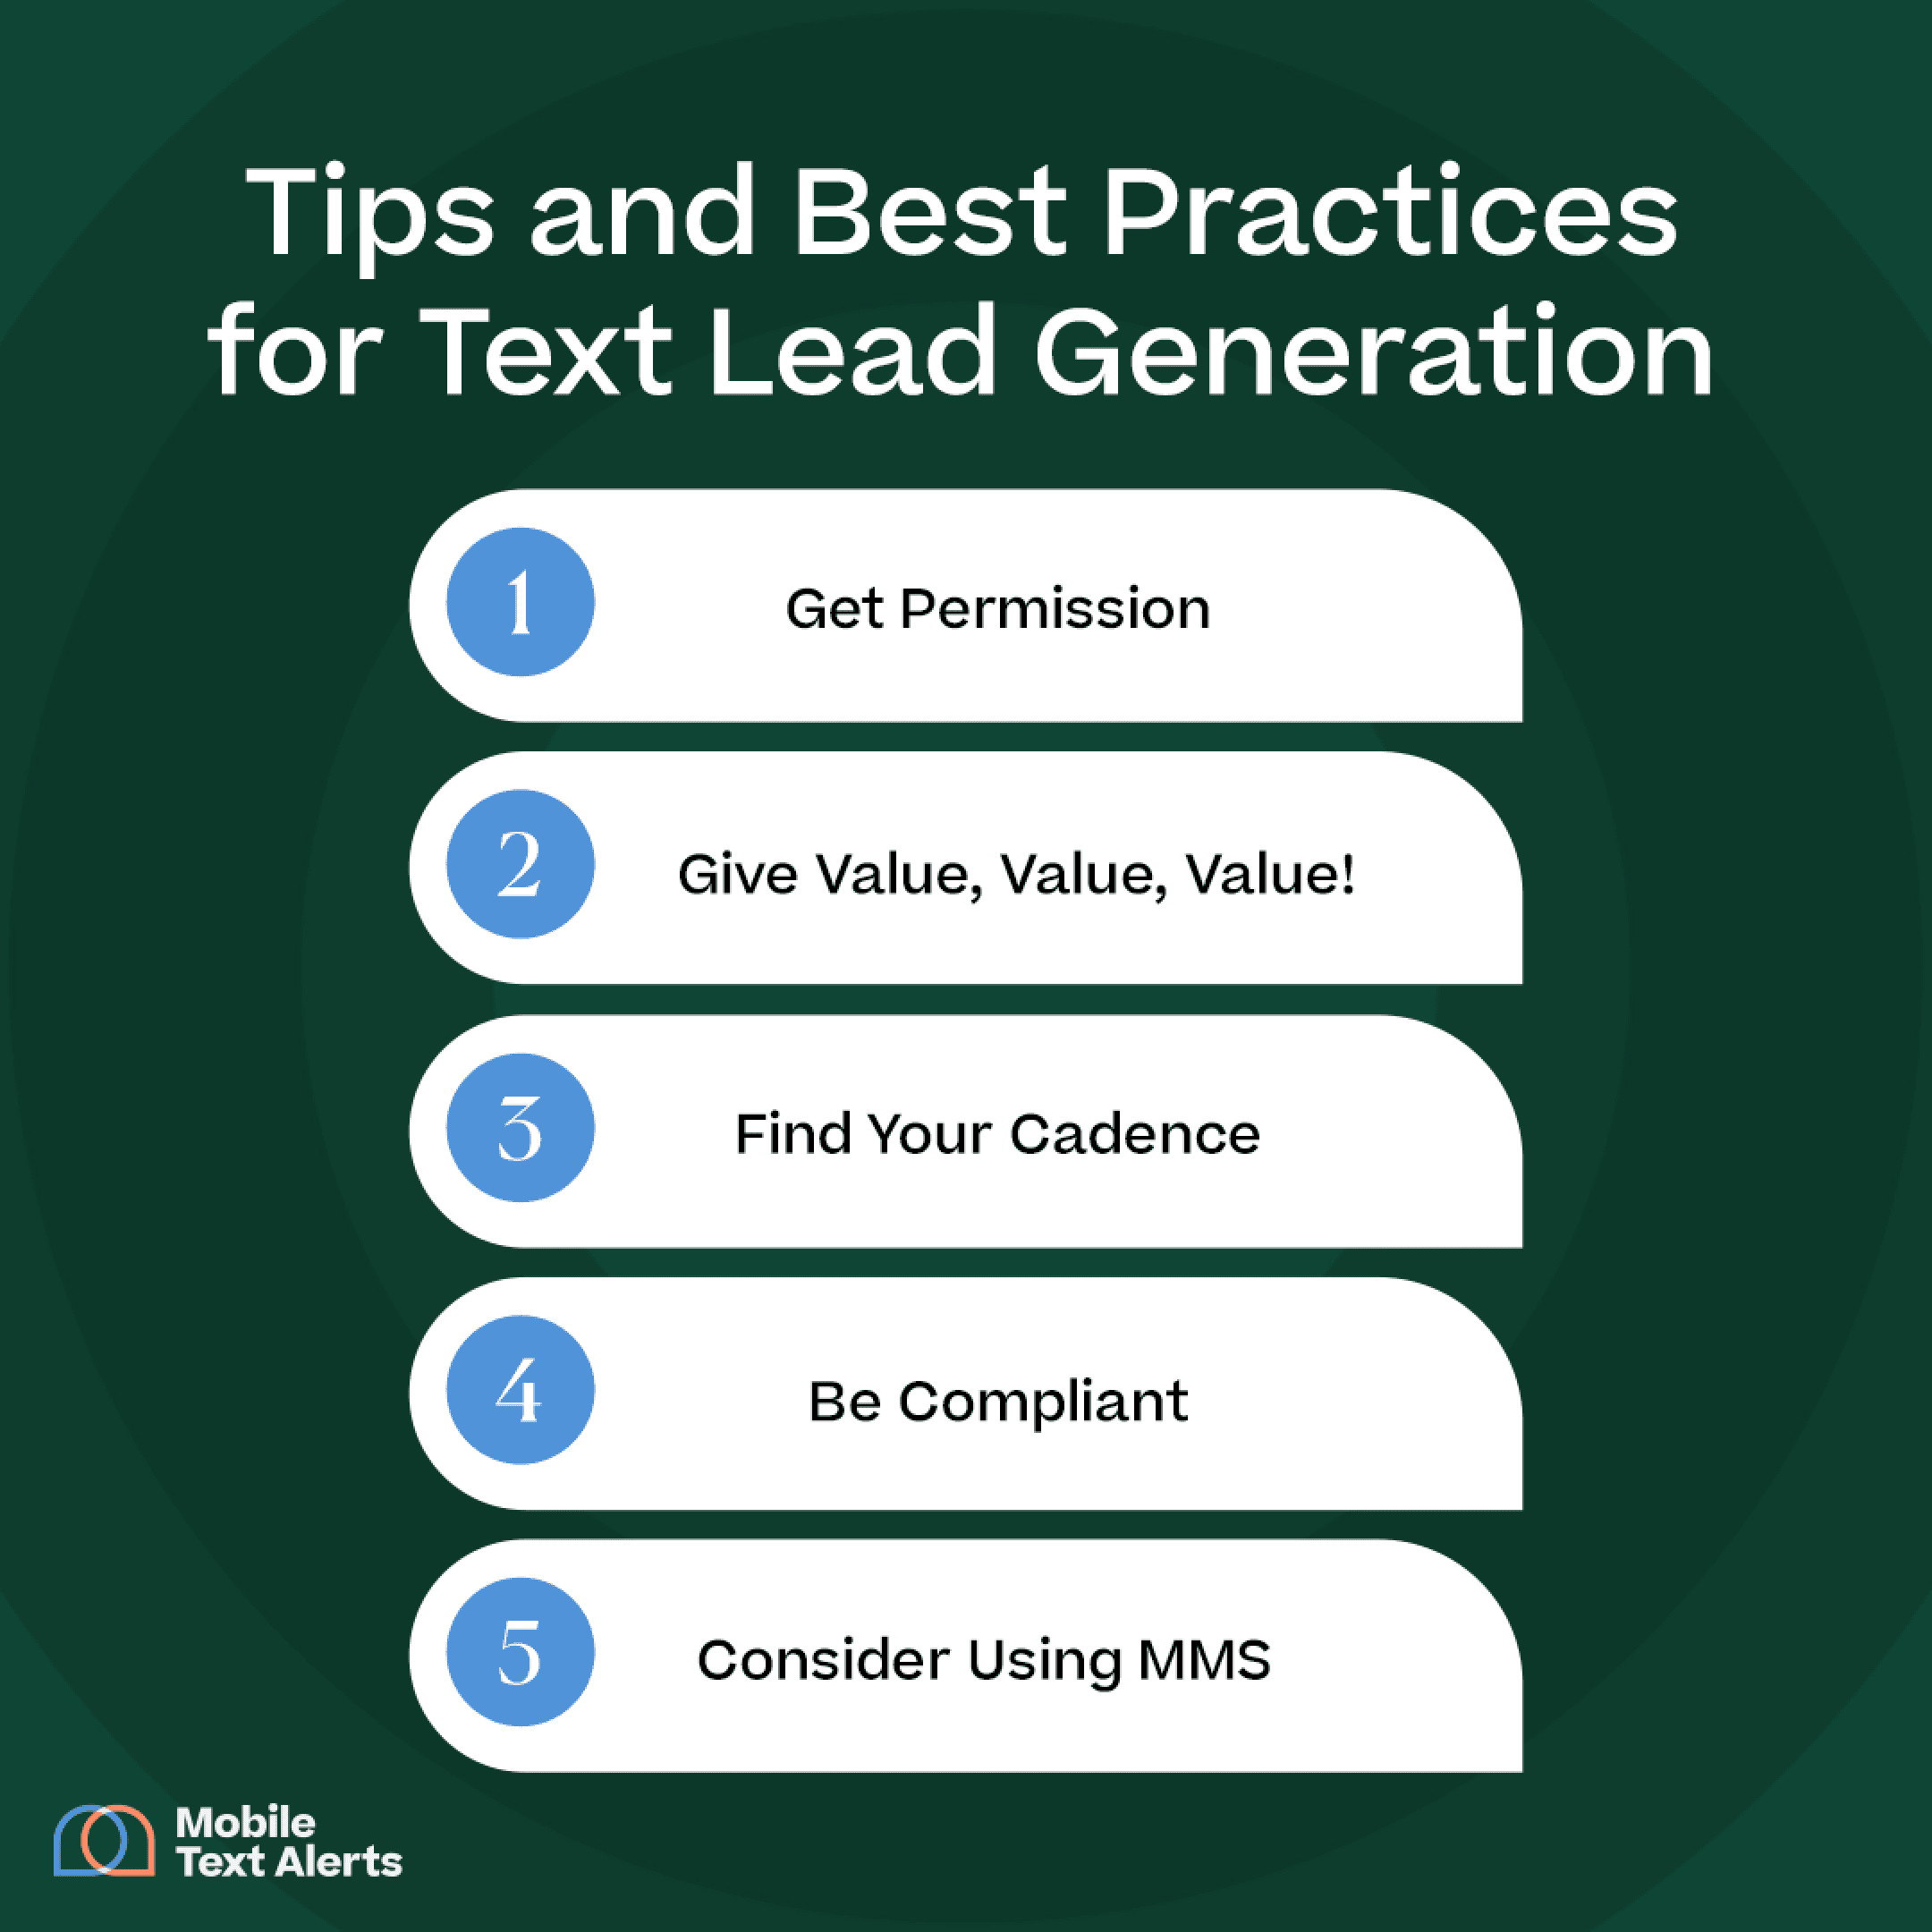 Tips and best practices for text lead generation